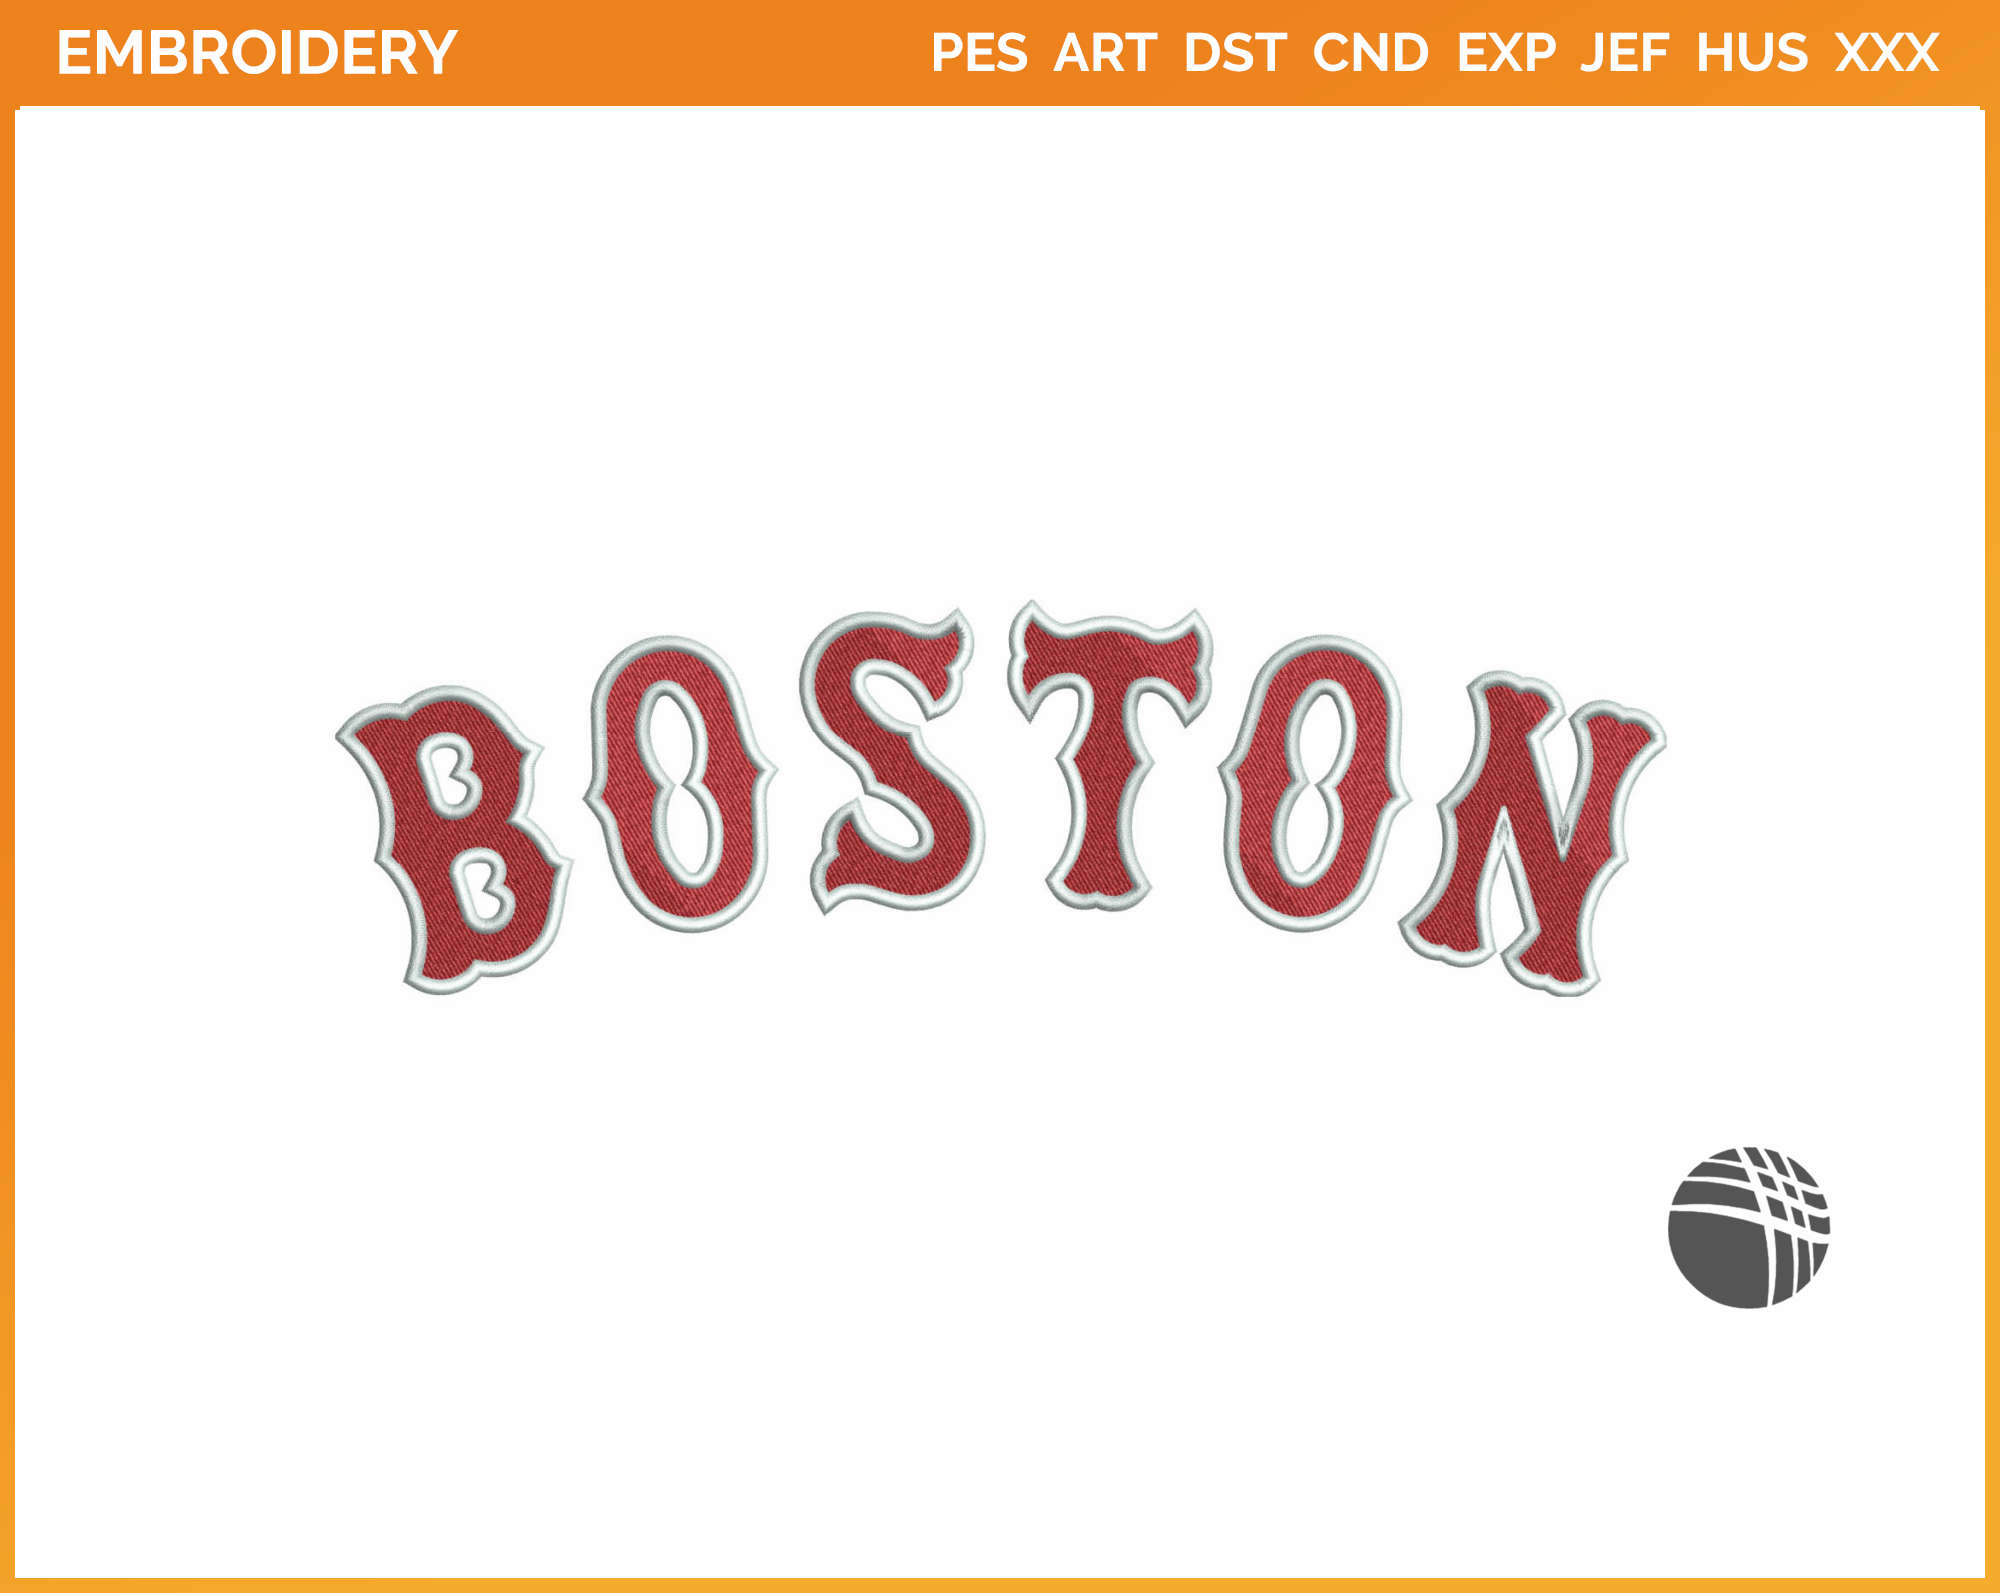 Red Sox Baseball Svg, Go Red Sox Svg, Retro Sports Jersey Font, Red Sox  Team Logo. Vector Cut file Cricut, Silhouette, Pdf Png Dxf Eps.